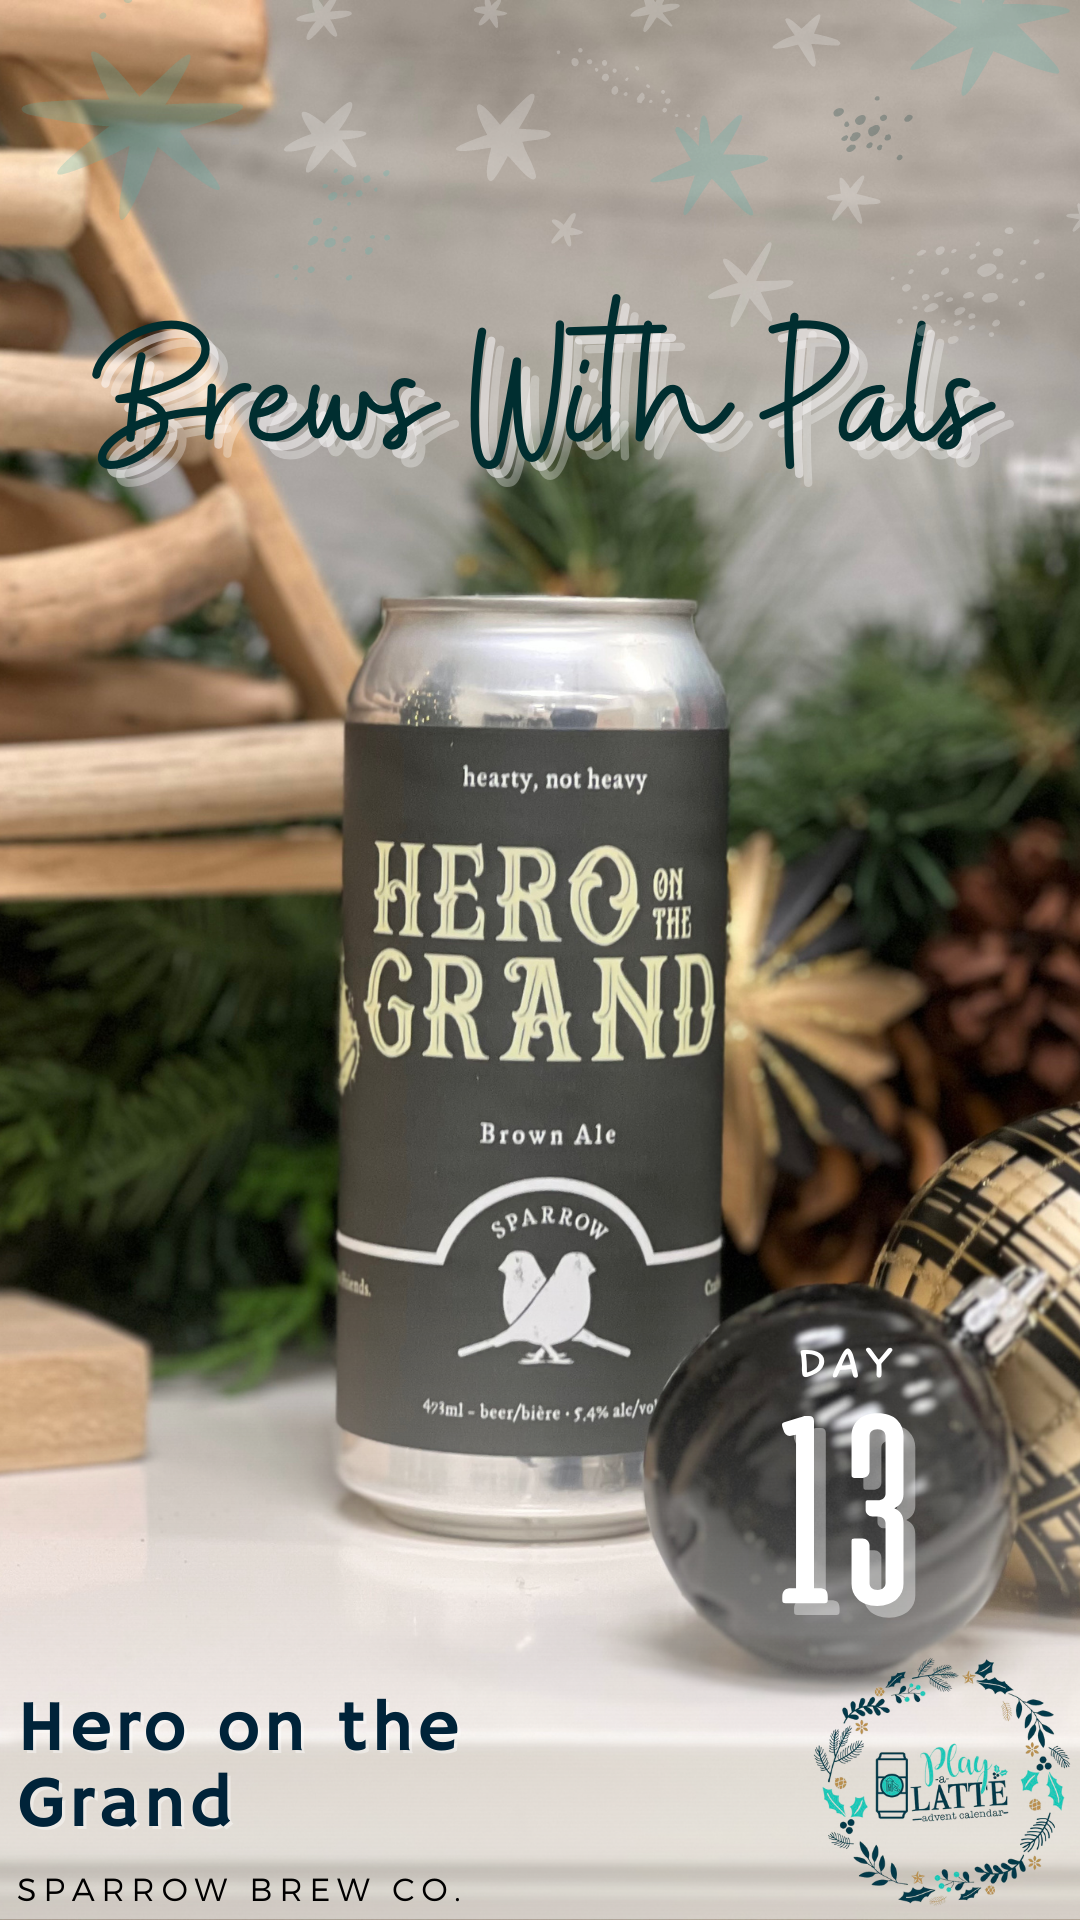 Day 13 - Hero on the Grand